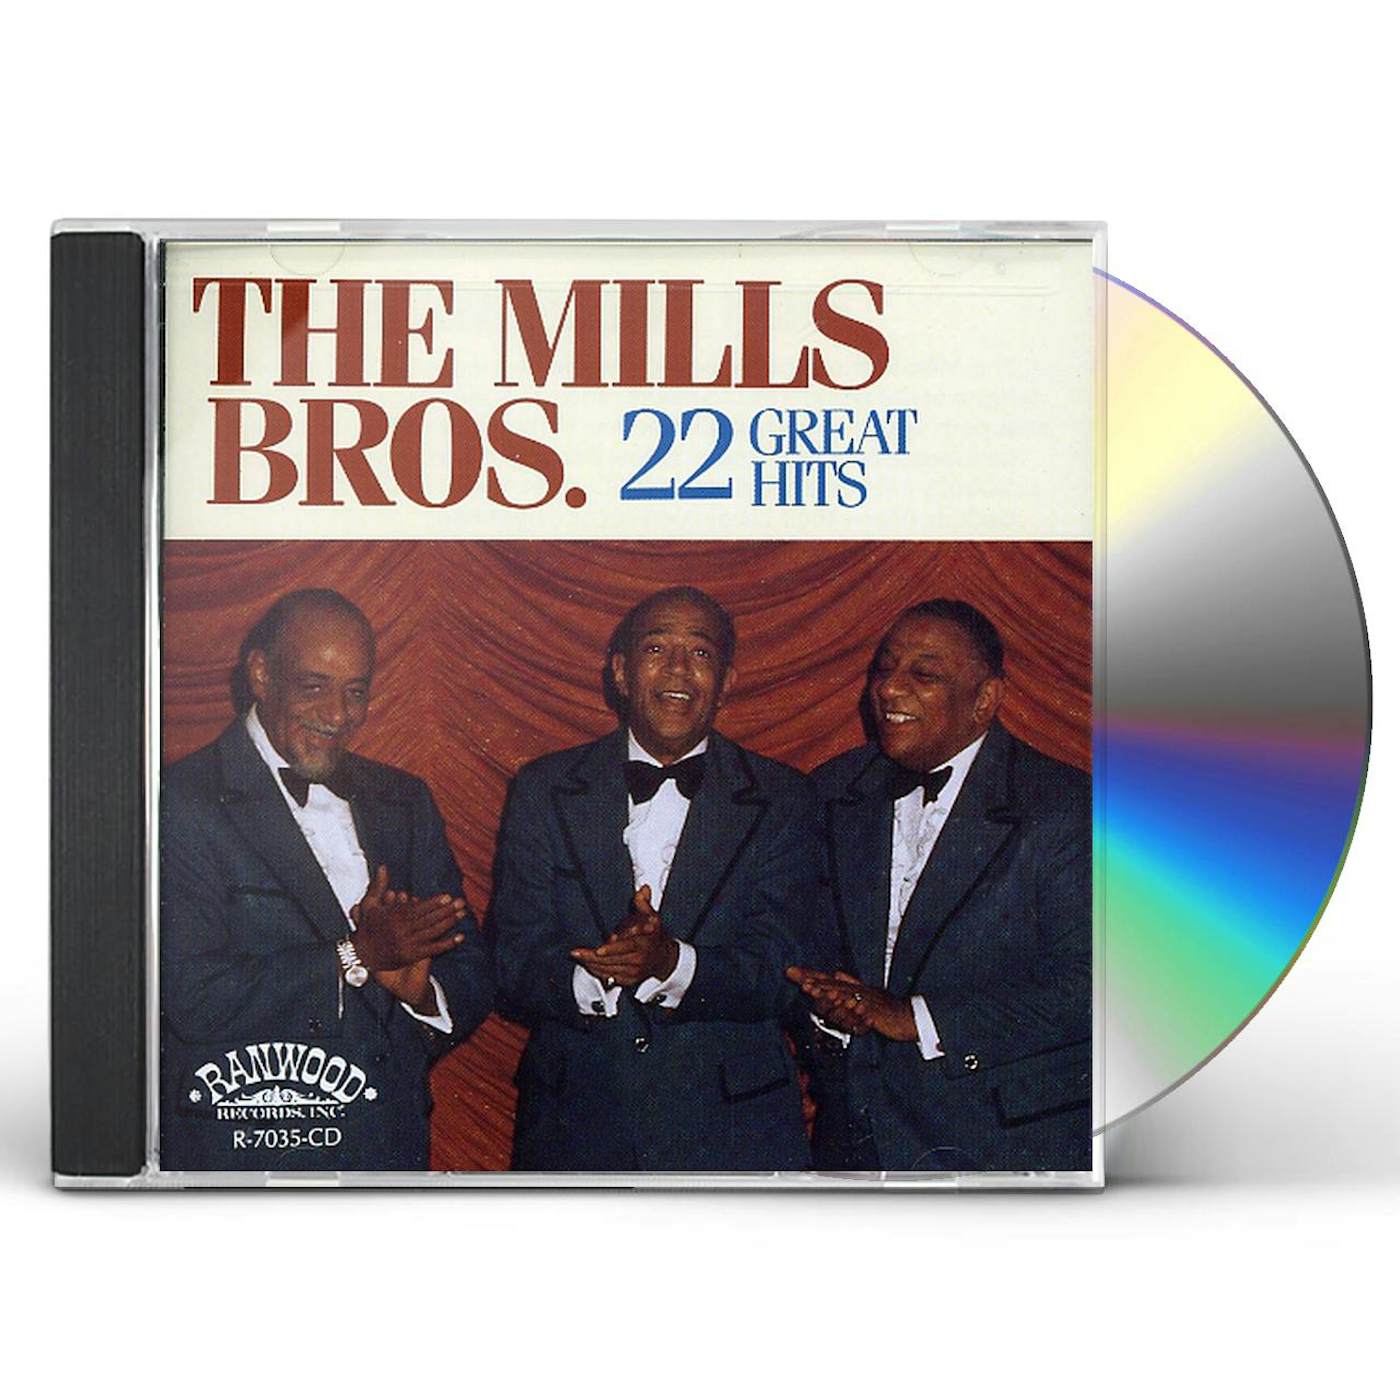 The Mills Brothers 22 GREAT HITS CD